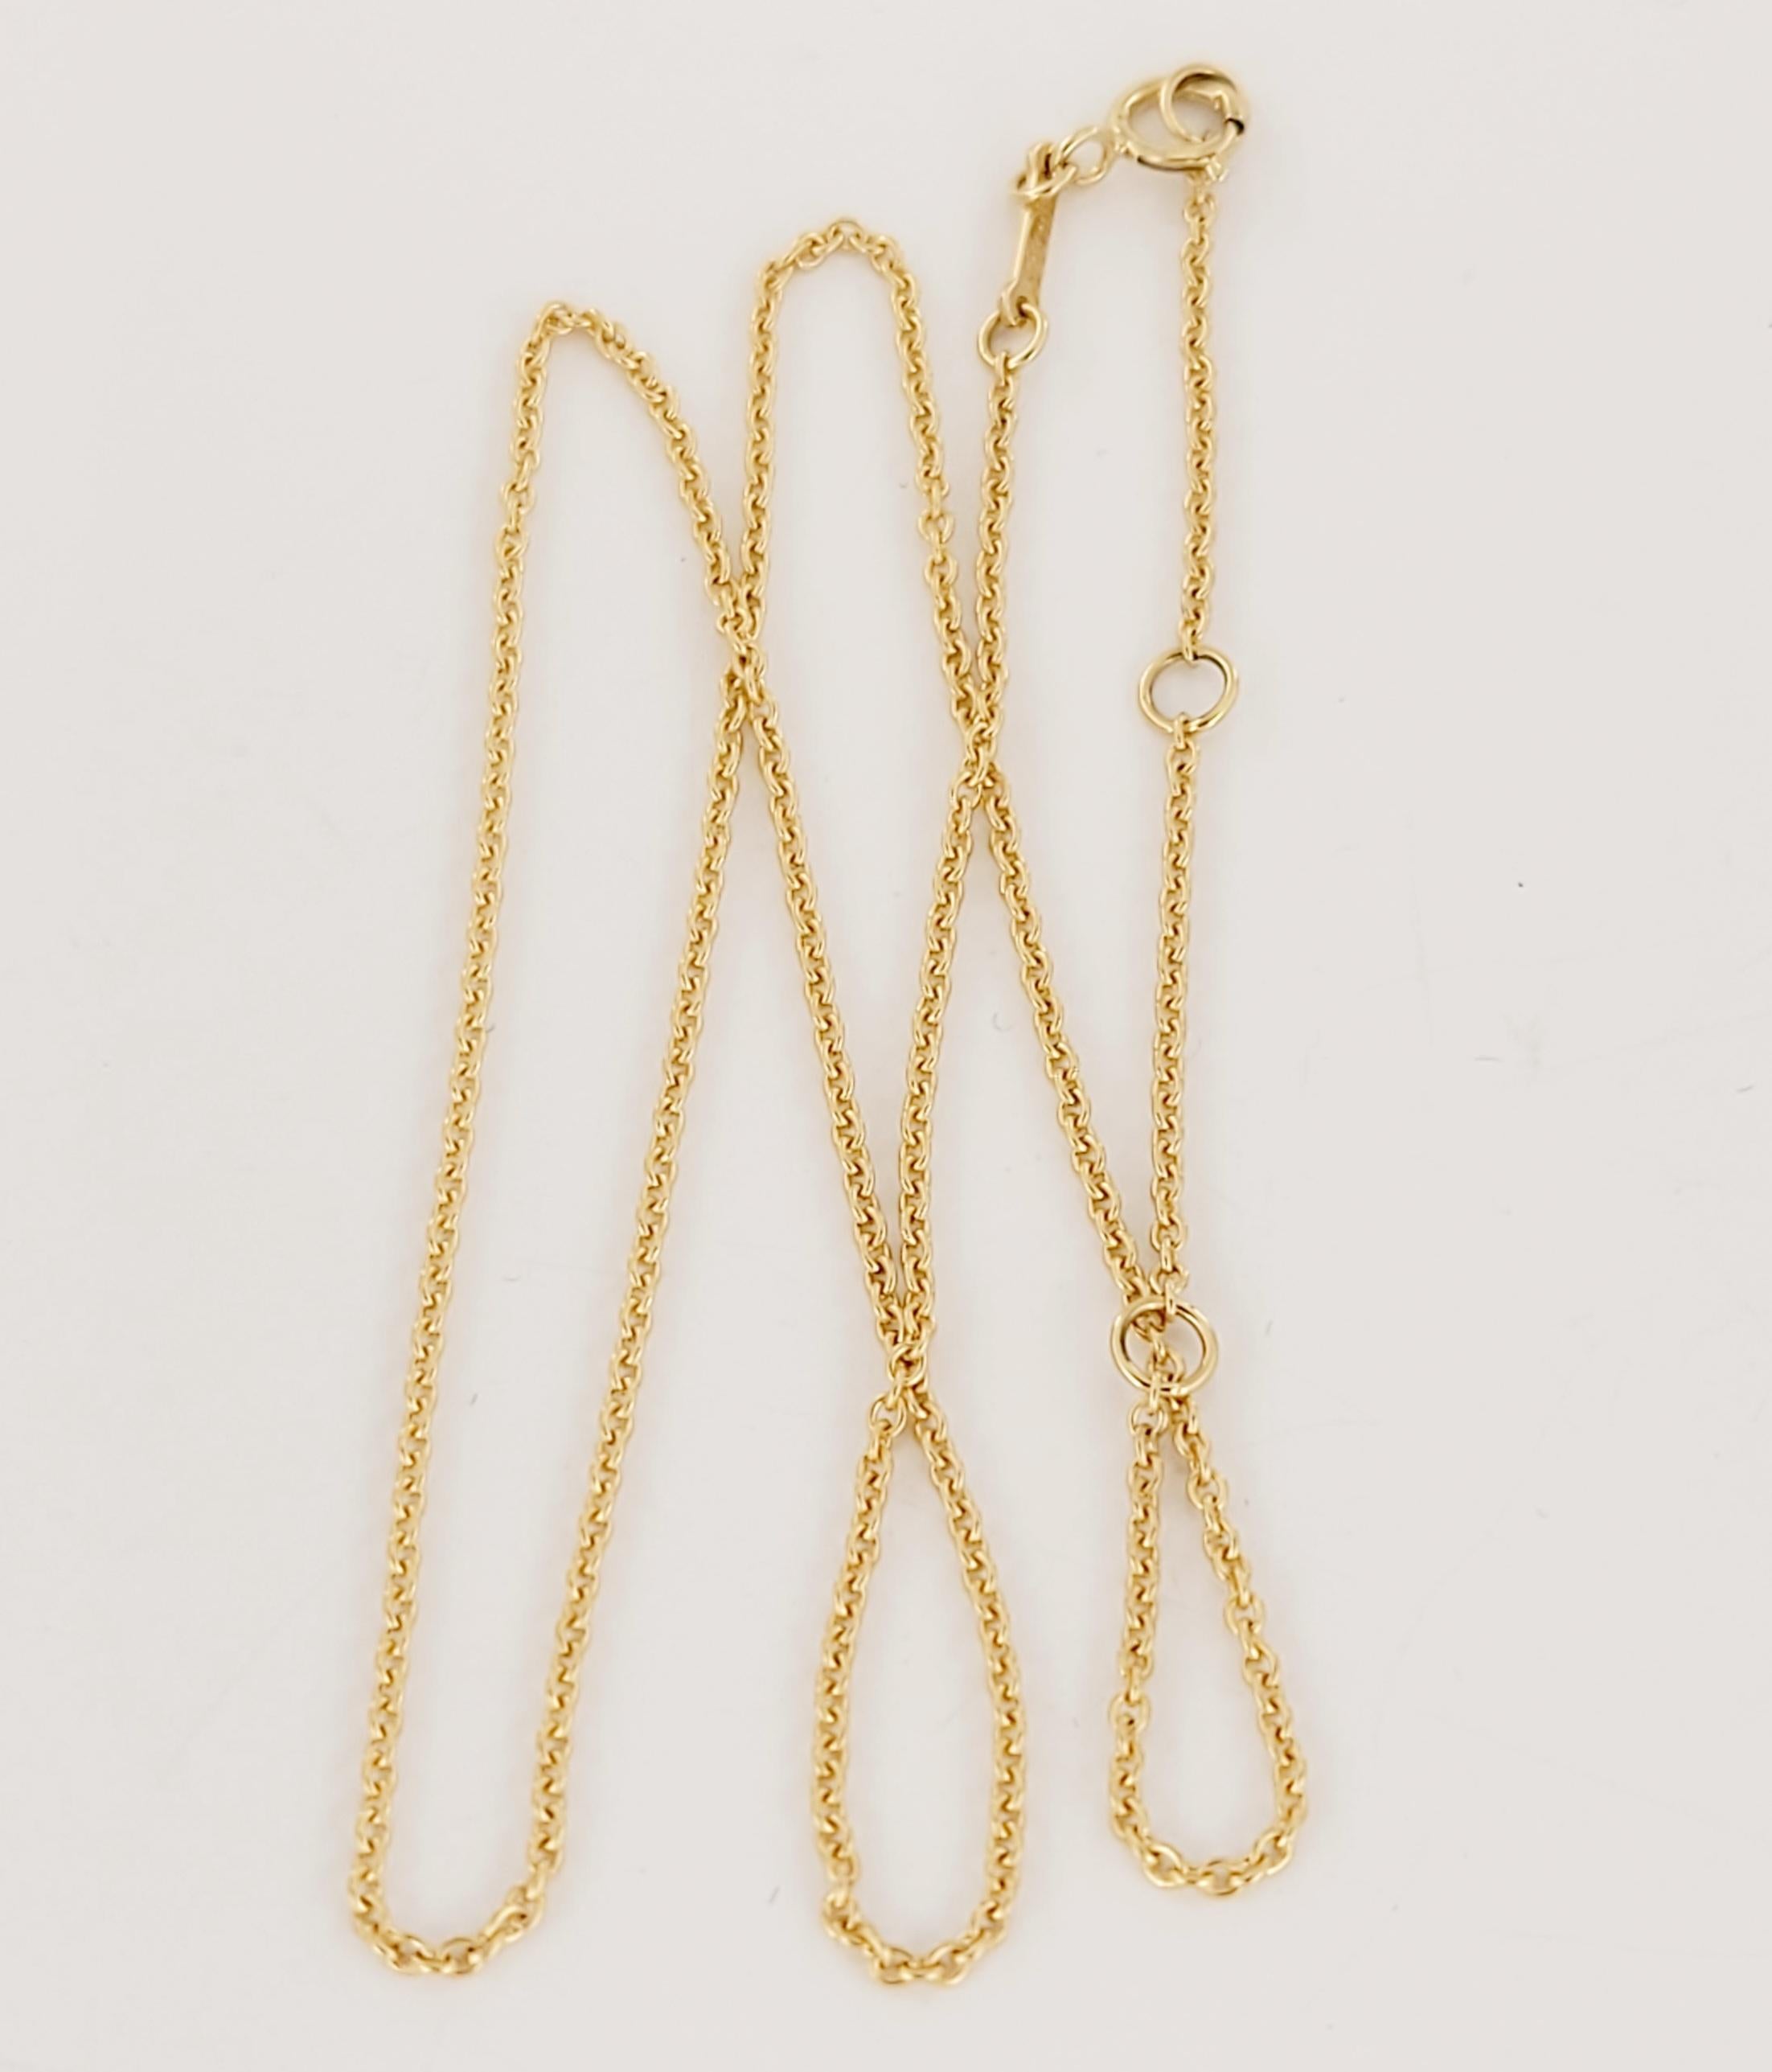 Paloma Picasso Tiffany & Co
Metal 18K Yellow Gold 
Chain Length 14'' Long
Adjustable Length 12'' 13'' 14''
Chain weight 2.0gr
Gender Unisex 
Condition New, never worn
Comes with Tiffany & Co pouch